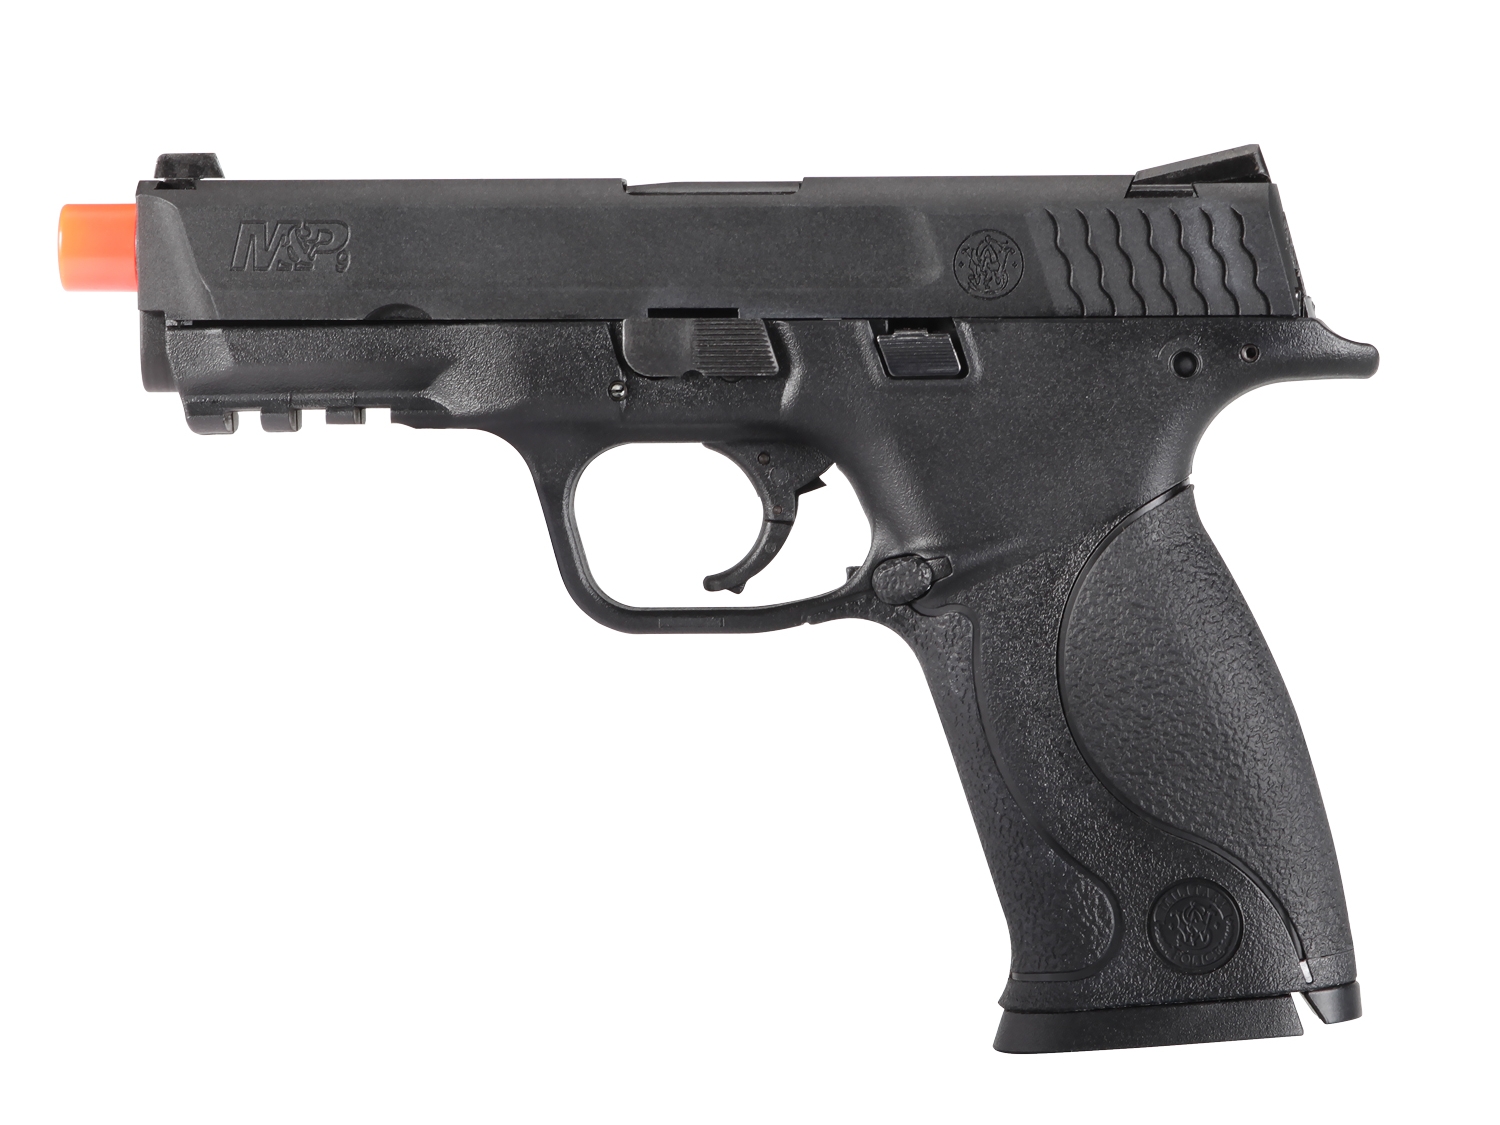 Smith & Wesson M&P 9 GBB 6mm Airsoft Pistol